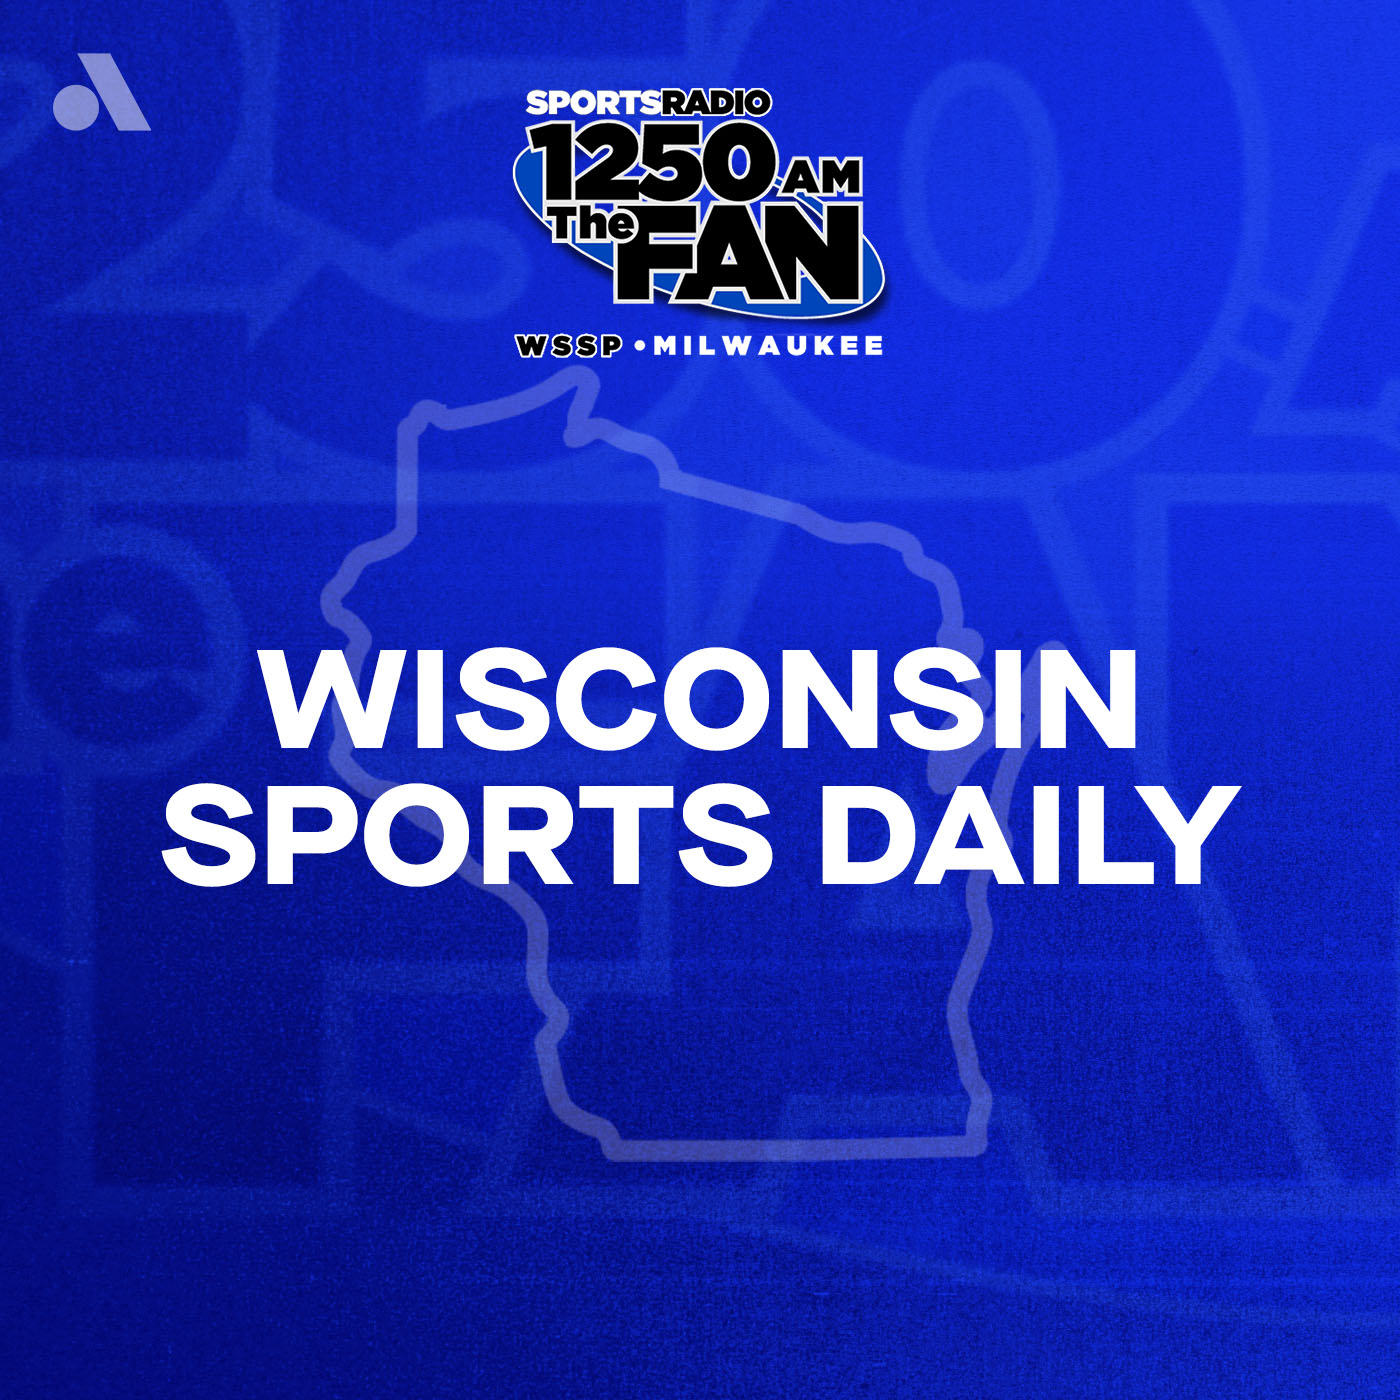 Thursday, April 25th: Peter Bukowski of Locked on Packers Joins Wisconsin Sports Daily!